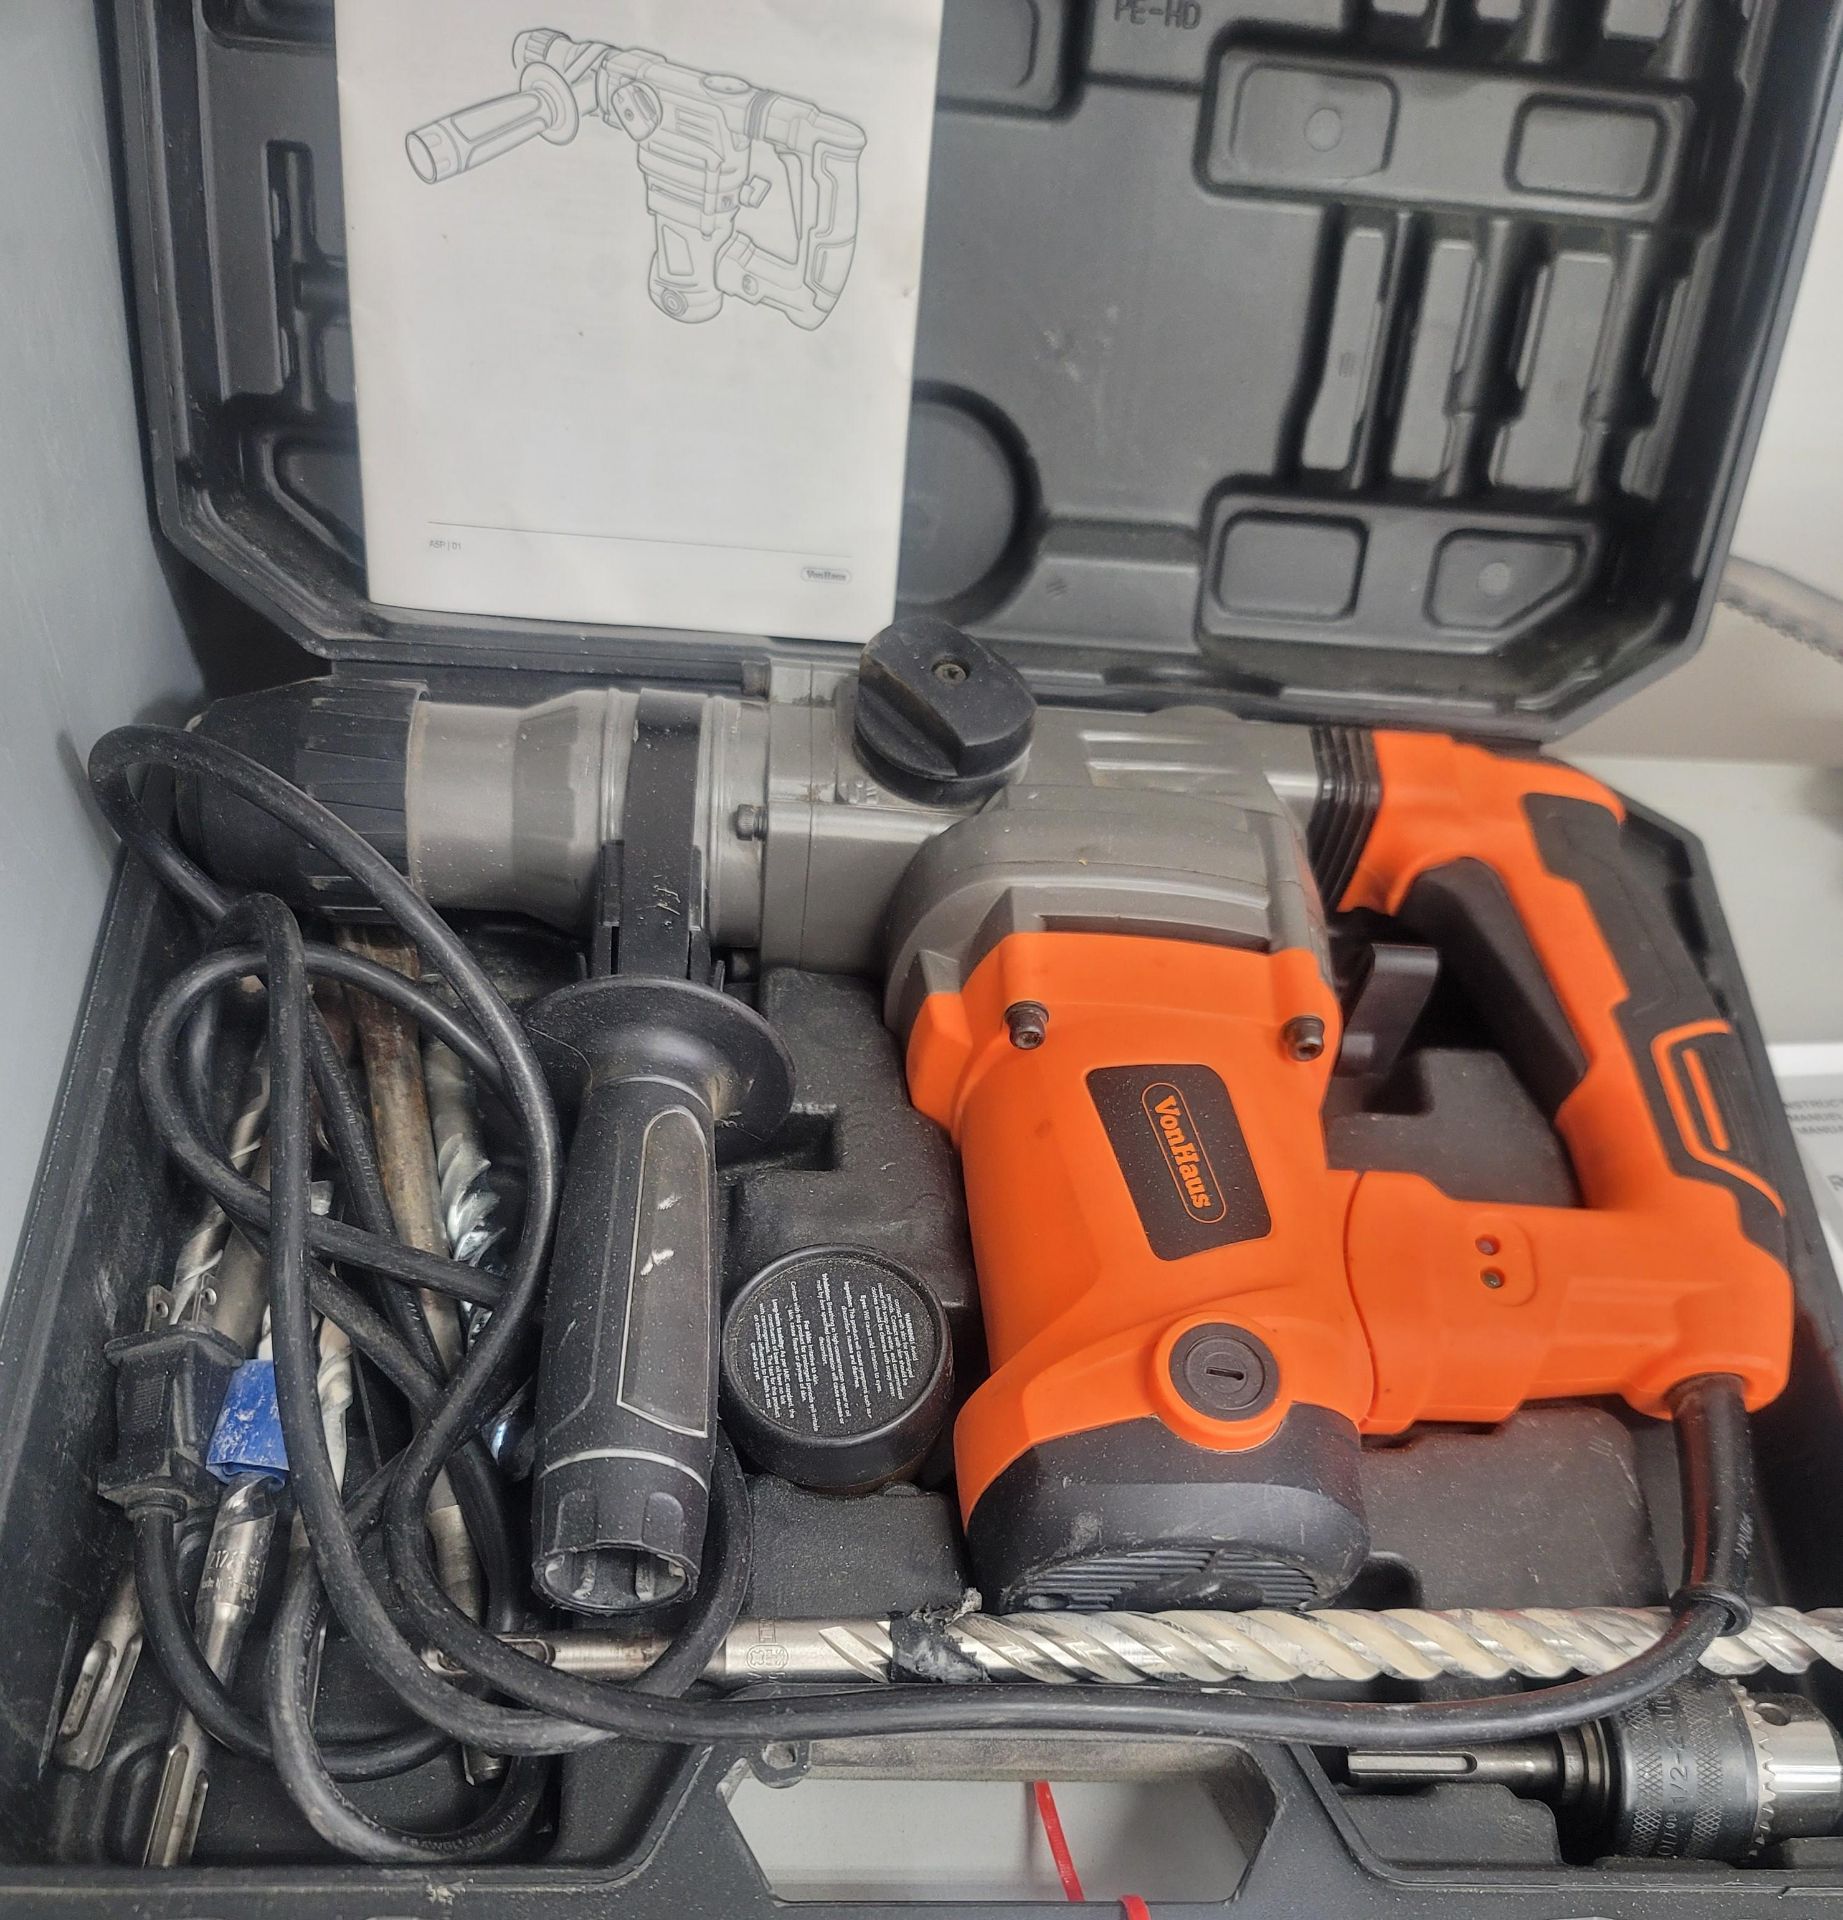 VONHAUS 1-3/16" SDS-PLUS HEAVY DUTY ROTARY HAMMER DRILL, 10 AMP, 3-FUNCTION MODES, 850 RPM, W/ - Image 2 of 2